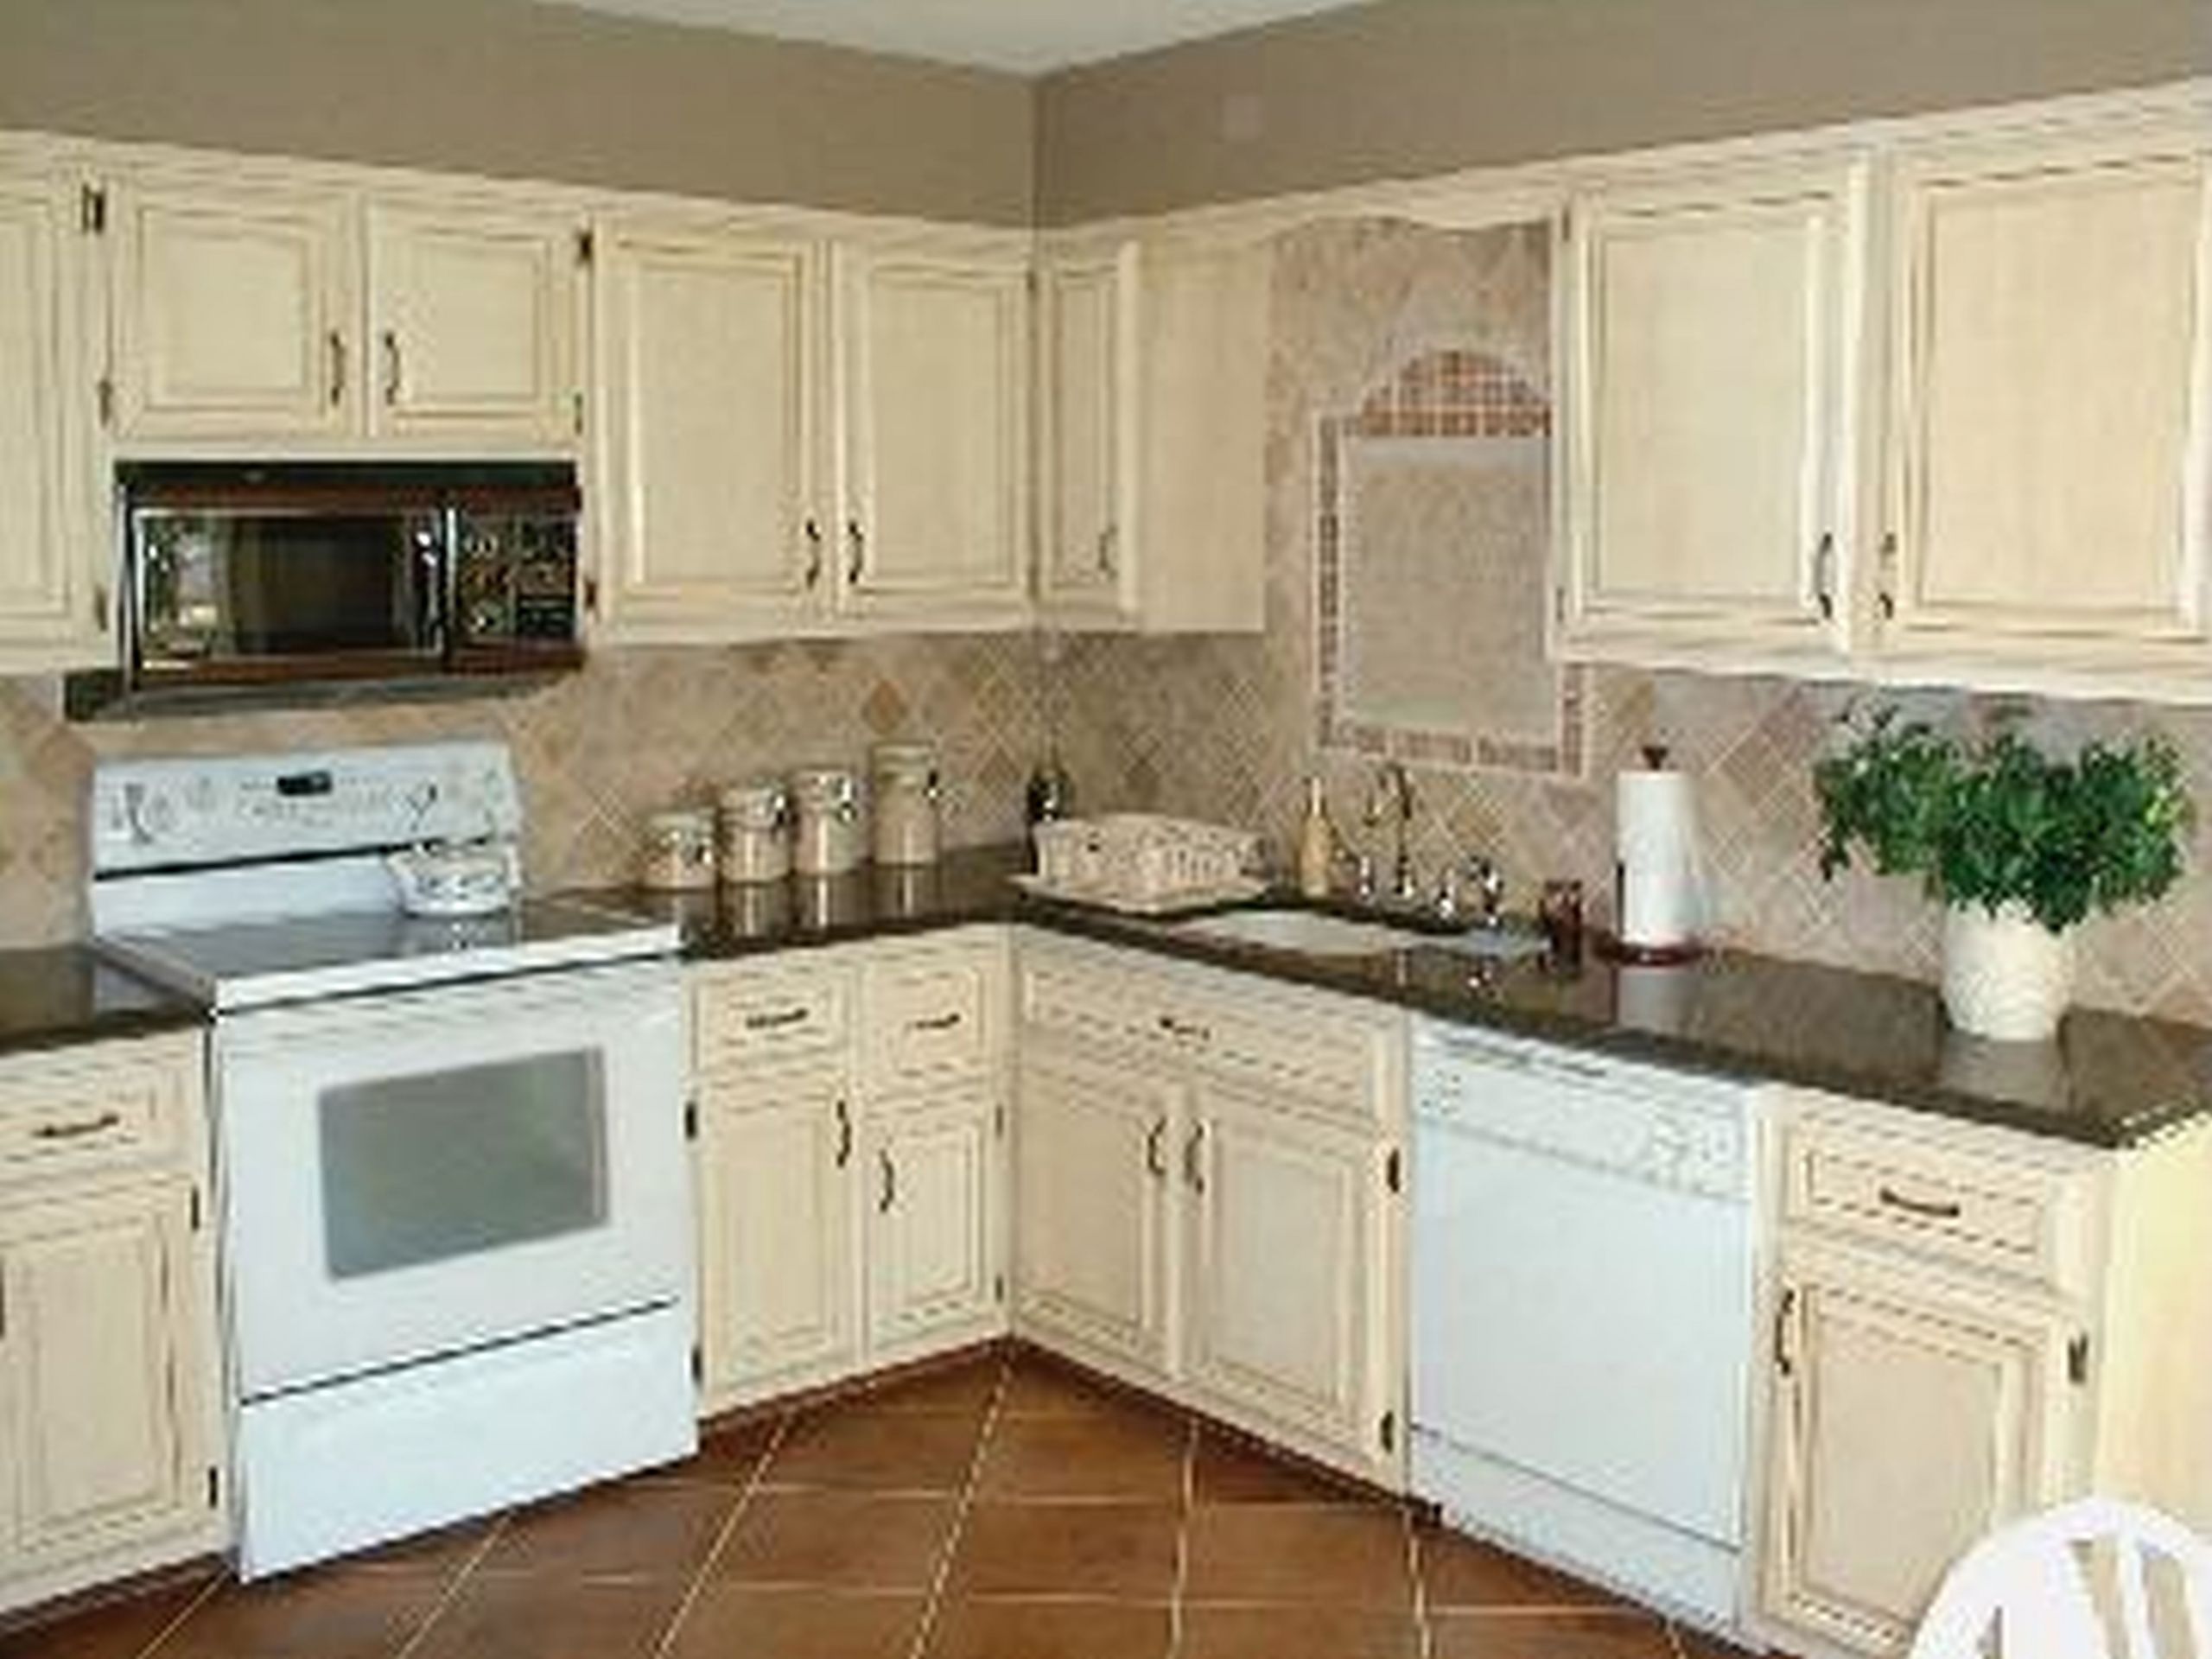 Painting Kitchen Cabinets Antique White
 How To Paint Your Kitchen Cabinets Antique White New